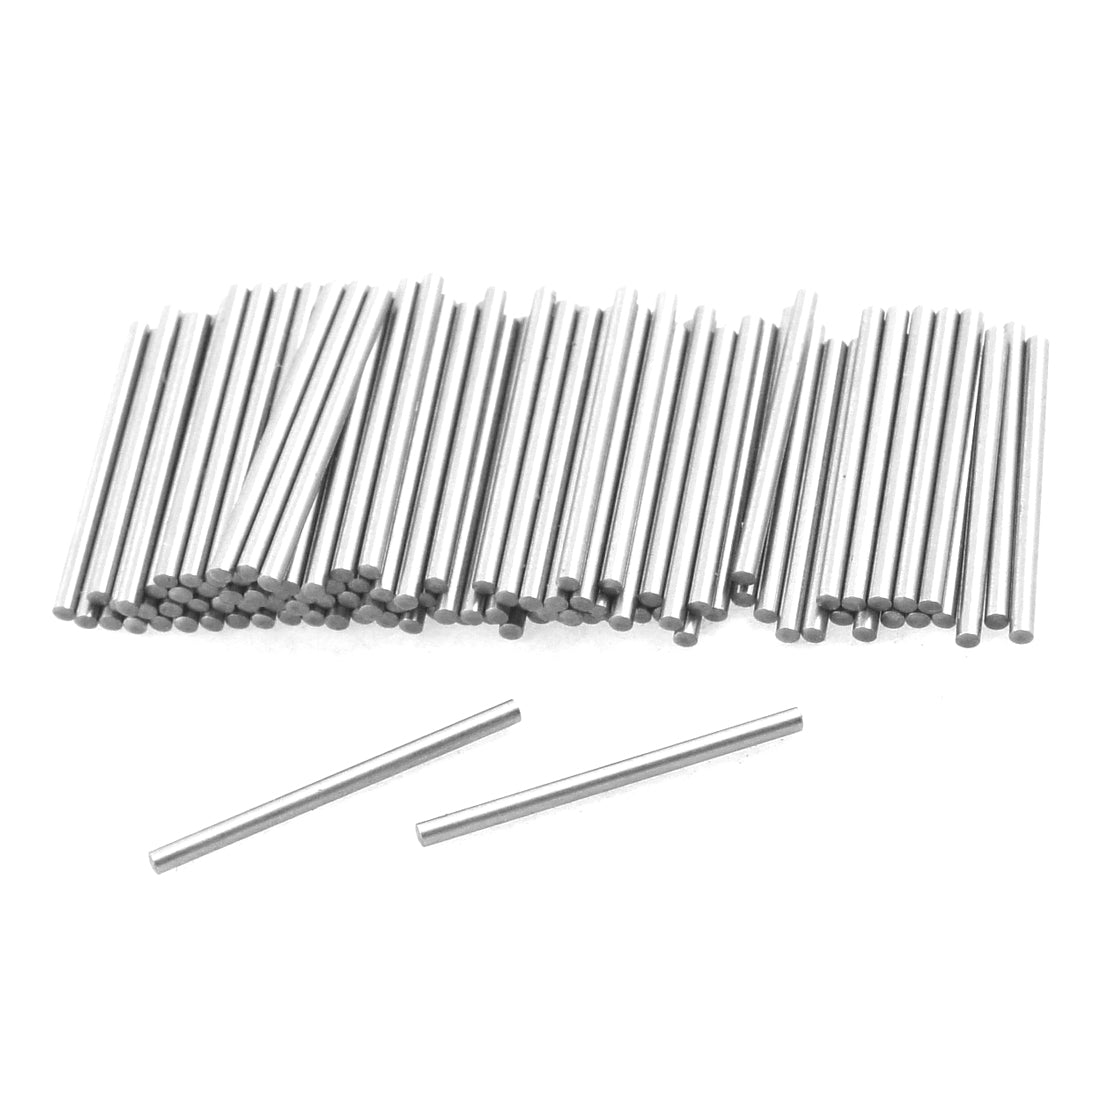 uxcell Uxcell 100 Pcs Stainless Steel 1mm x 15.8mm Dowel Pins Fasten Elements